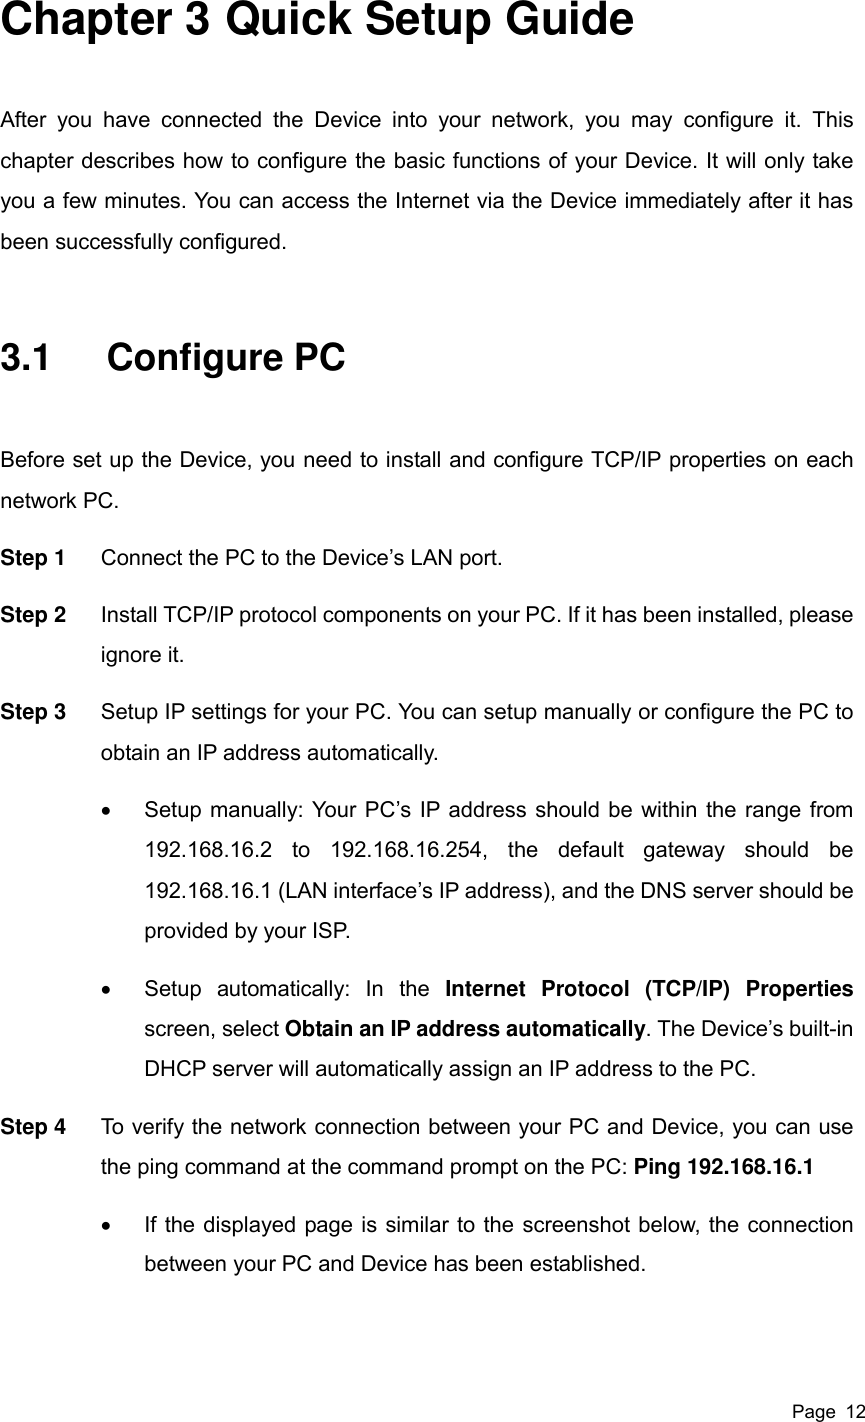  Page  12 Chapter 3 Quick Setup Guide After  you  have  connected  the  Device  into  your  network,  you  may  configure  it.  This chapter describes how to configure the basic functions of your Device. It will only take you a few minutes. You can access the Internet via the Device immediately after it has been successfully configured. 3.1  Configure PC Before set up the Device, you need to install and configure TCP/IP properties on each network PC. Step 1  Connect the PC to the Device’s LAN port.   Step 2  Install TCP/IP protocol components on your PC. If it has been installed, please ignore it. Step 3  Setup IP settings for your PC. You can setup manually or configure the PC to obtain an IP address automatically.   Setup manually: Your PC’s IP address should be within the range from 192.168.16.2  to  192.168.16.254,  the  default  gateway  should  be 192.168.16.1 (LAN interface’s IP address), and the DNS server should be provided by your ISP.   Setup  automatically:  In  the  Internet  Protocol  (TCP/IP)  Properties screen, select Obtain an IP address automatically. The Device’s built-in DHCP server will automatically assign an IP address to the PC. Step 4  To verify the network connection between your PC and Device, you can use the ping command at the command prompt on the PC: Ping 192.168.16.1   If the displayed page is similar to the screenshot below, the connection between your PC and Device has been established. 